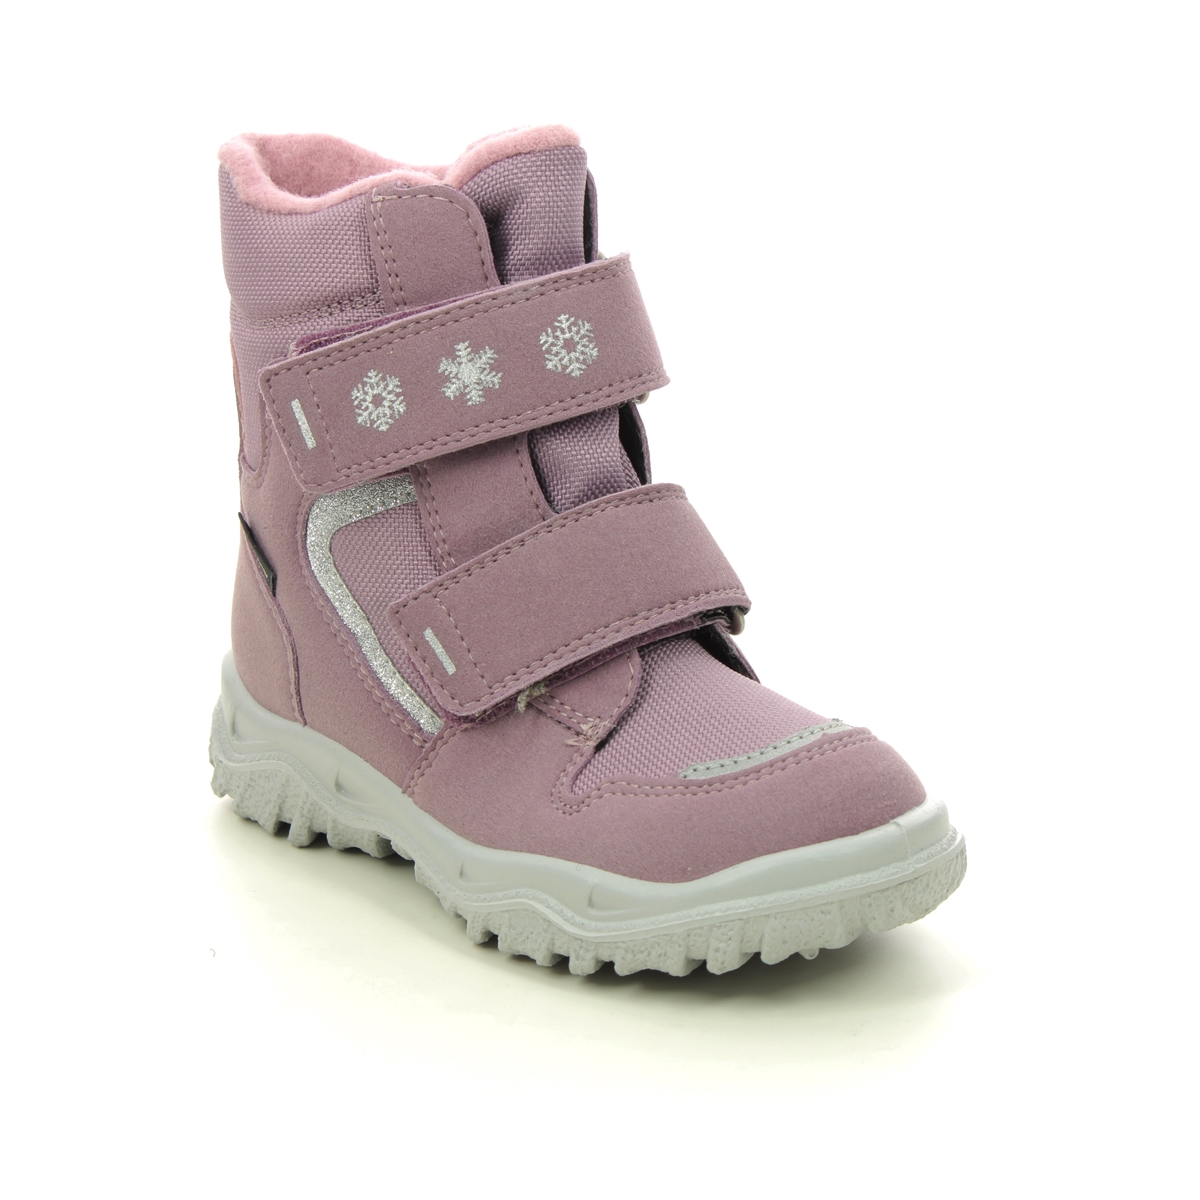 Superfit Husky  Inf Gtx Pink Leather Kids Toddler Girls Boots 1000045-8510 In Size 21 In Plain Pink Leather For kids